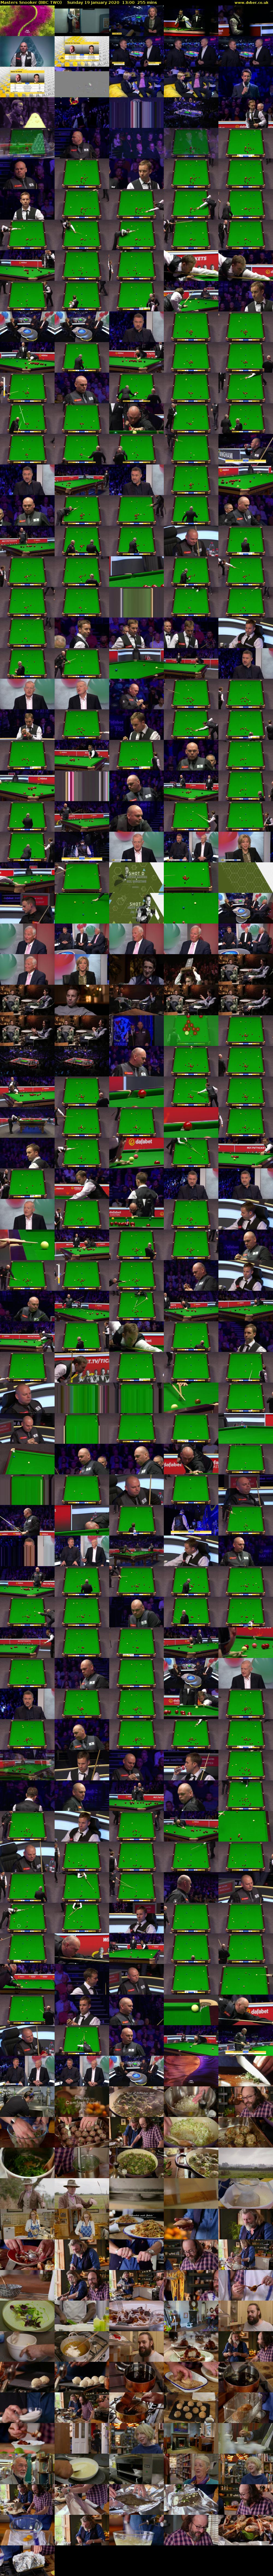 Masters Snooker (BBC TWO) Sunday 19 January 2020 13:00 - 17:15